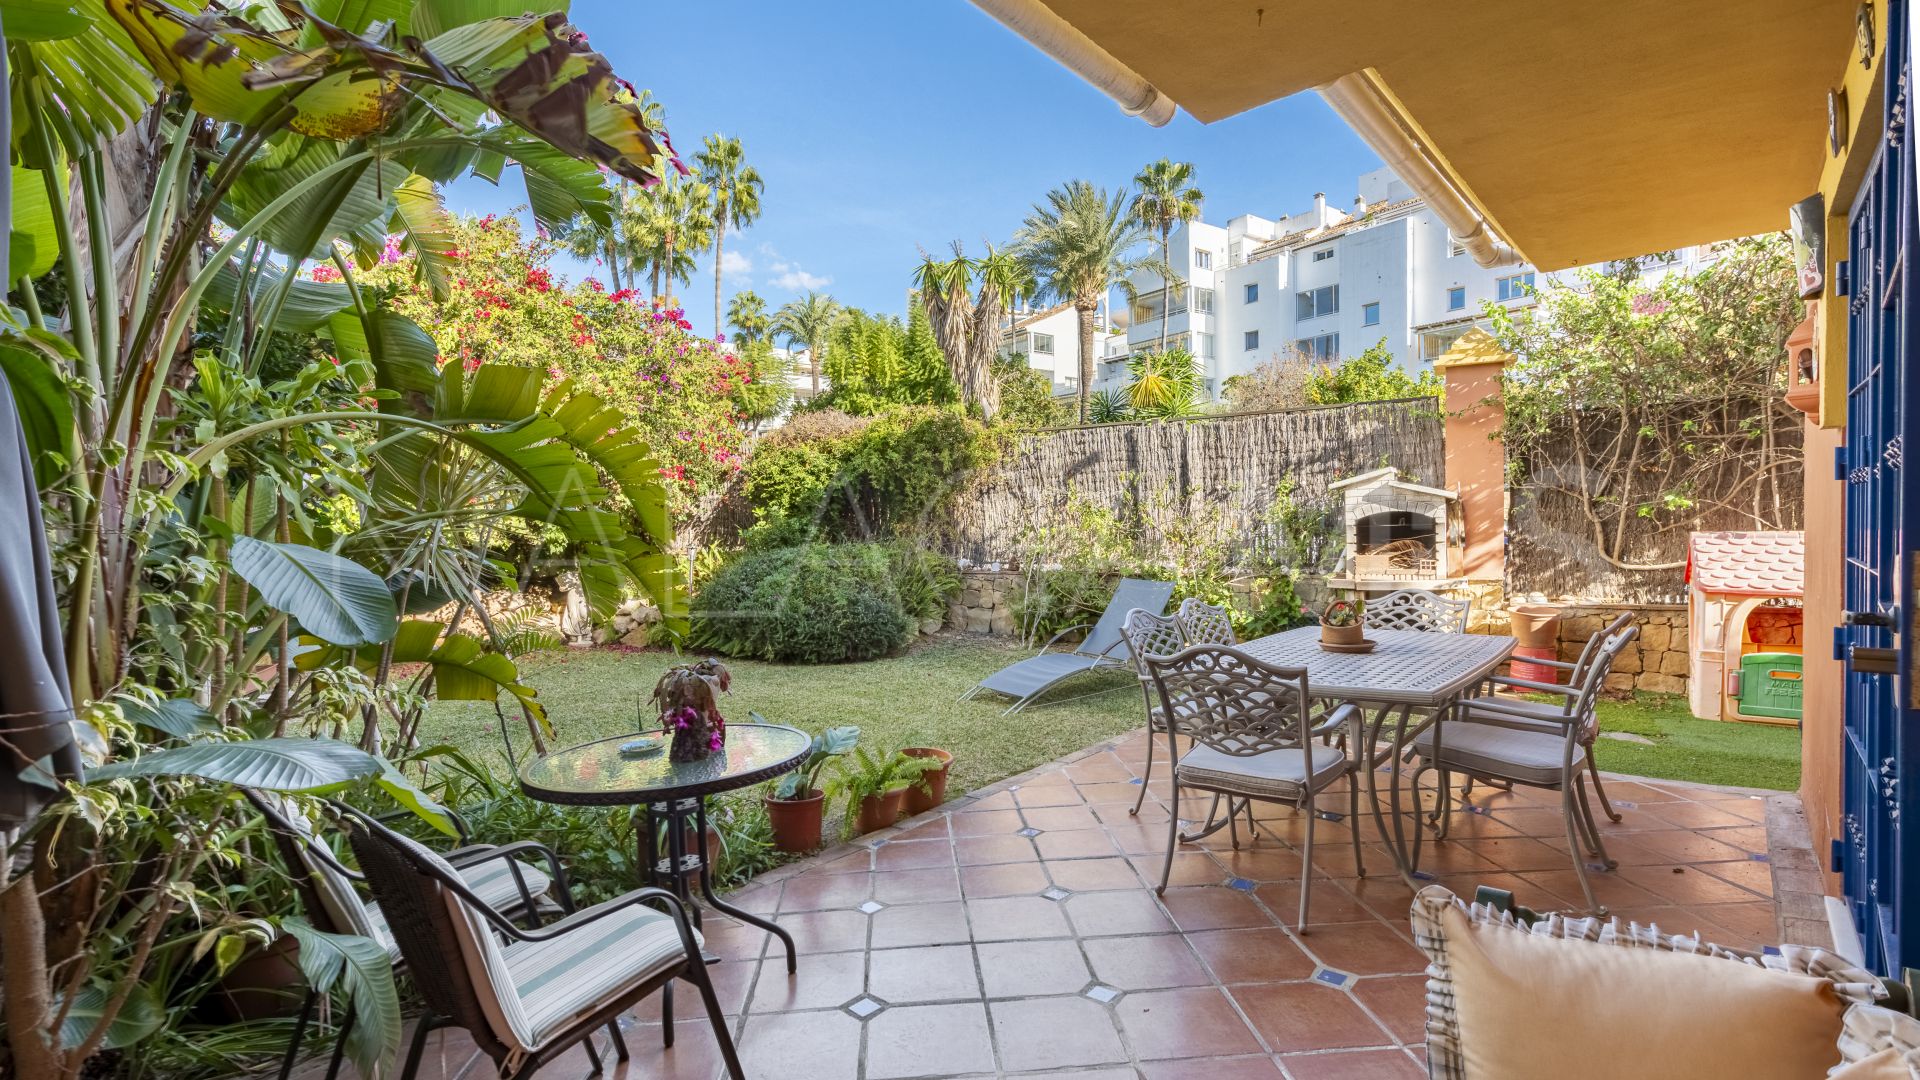 Pareado for sale with 3 bedrooms in Atalaya